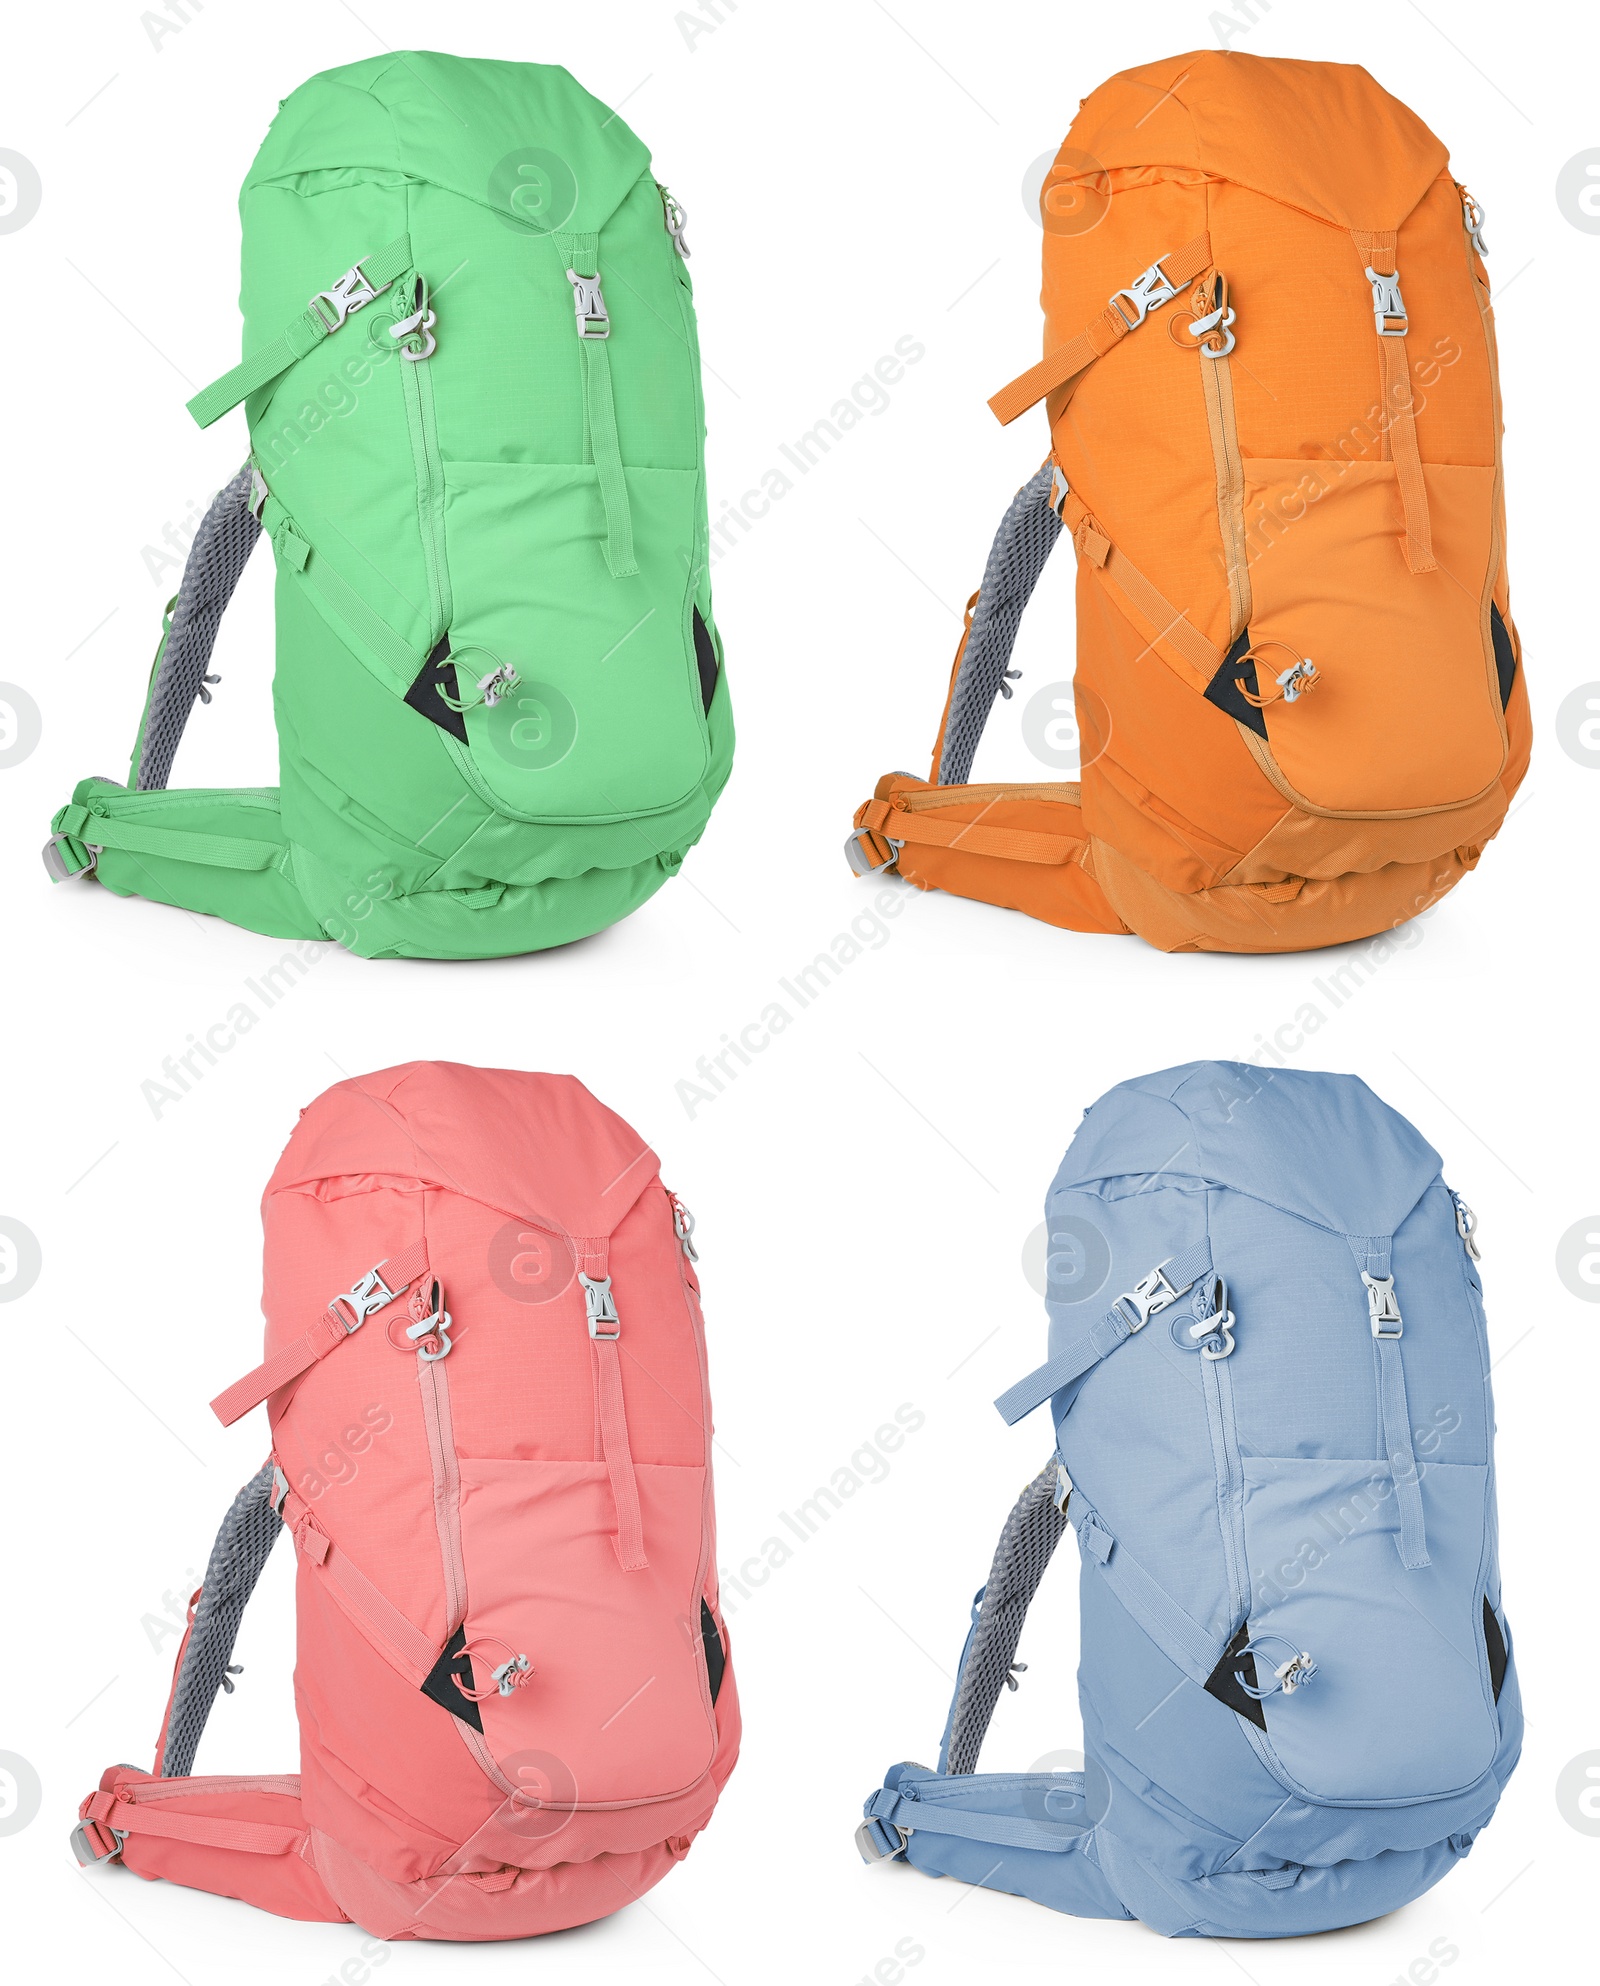 Image of Different hiking backpacks on white background, collage 